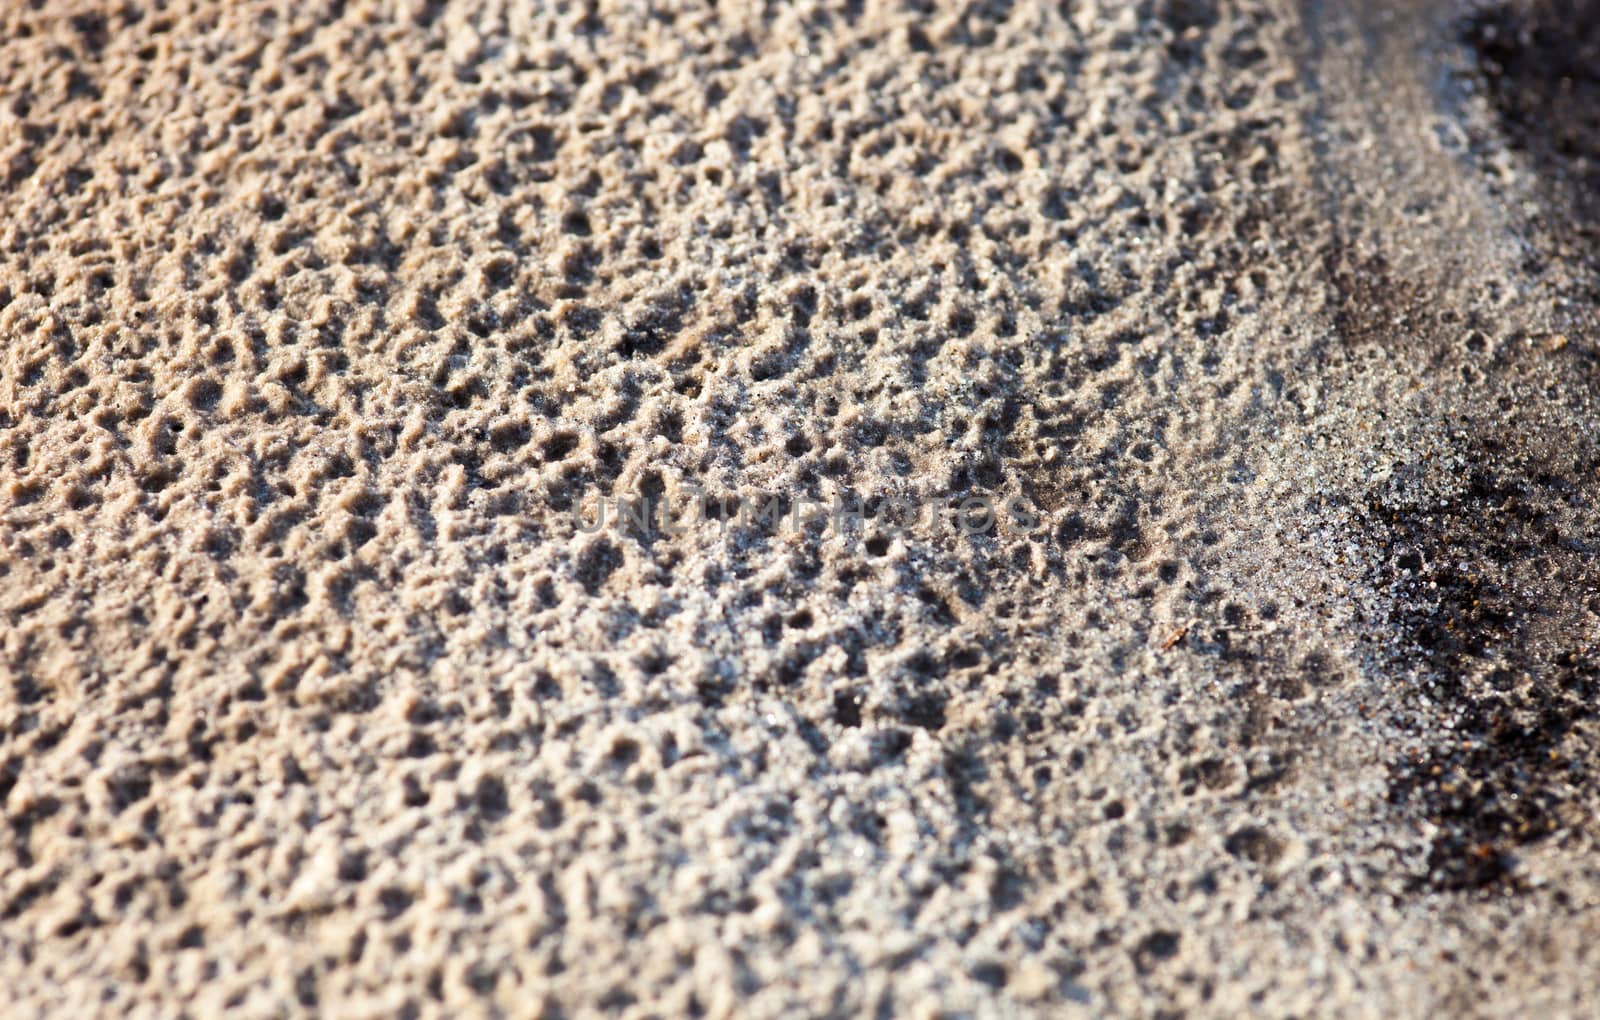 Sand surface after the rain by rootstocks